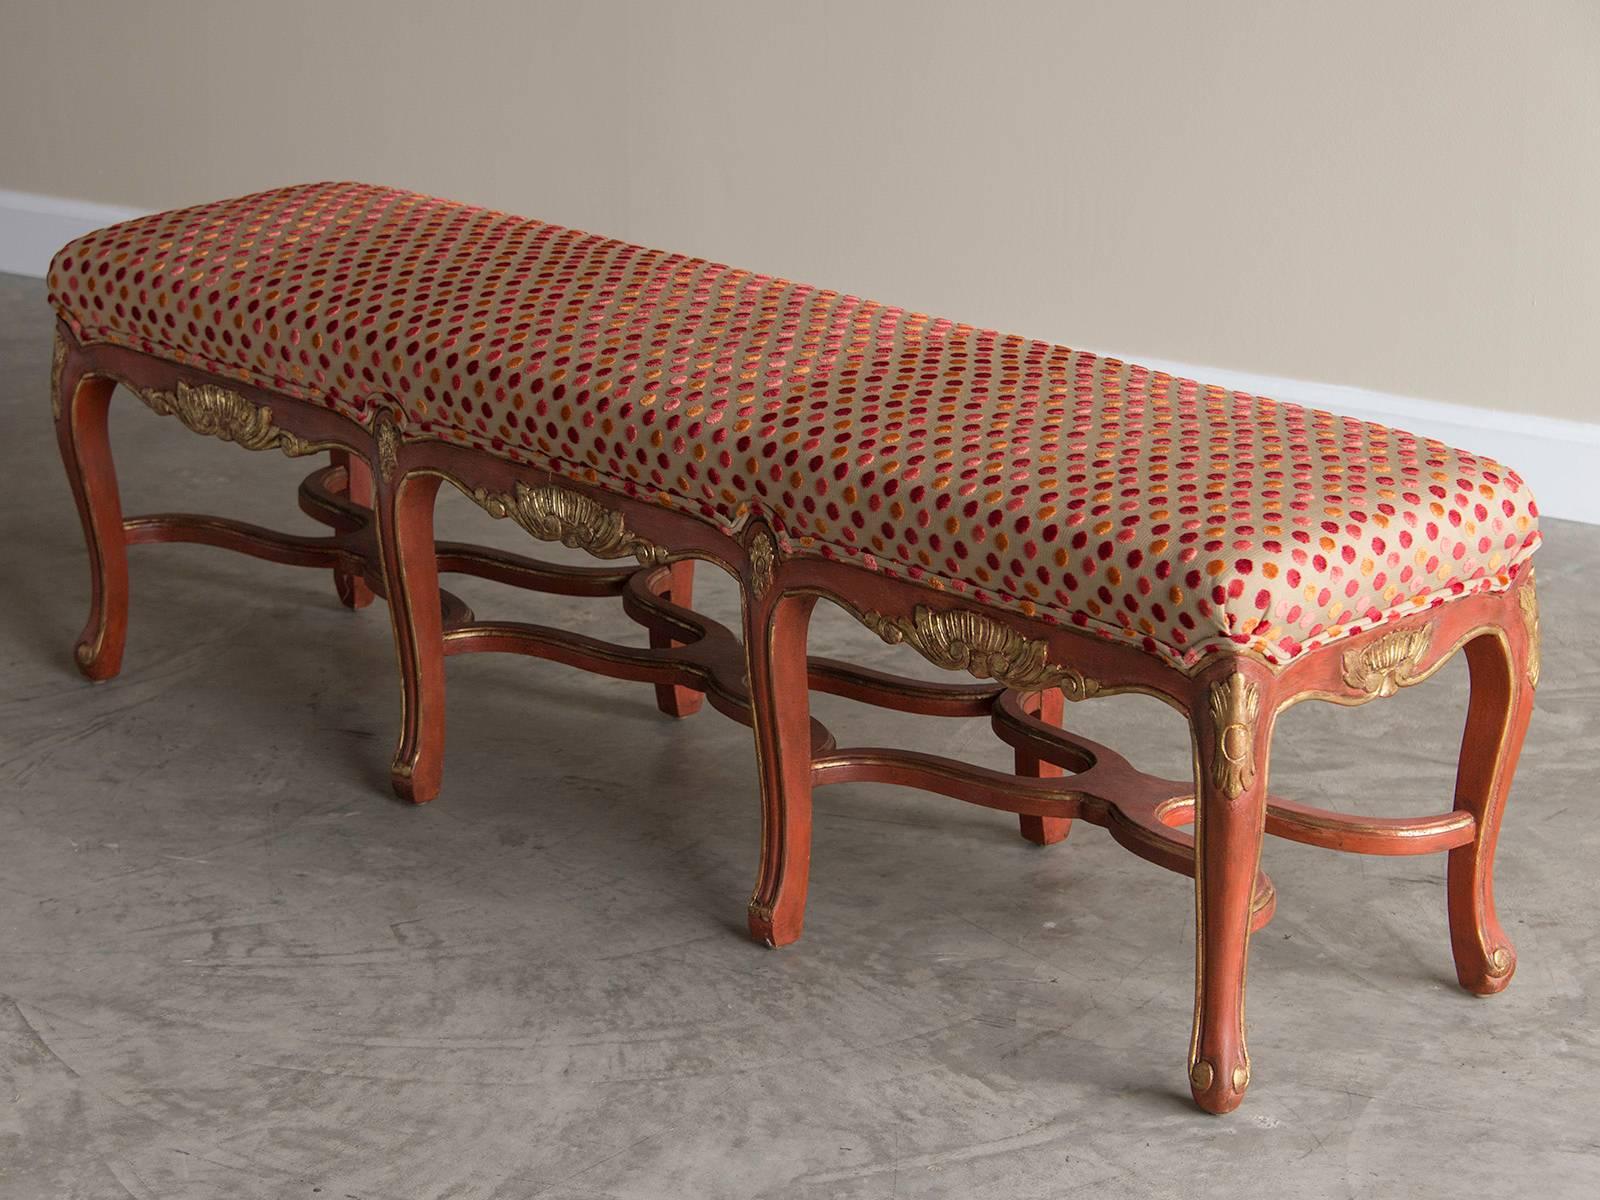 Hand-Painted French Regence Style Painted Bench, Eight Cabriole Legs with Stretchers